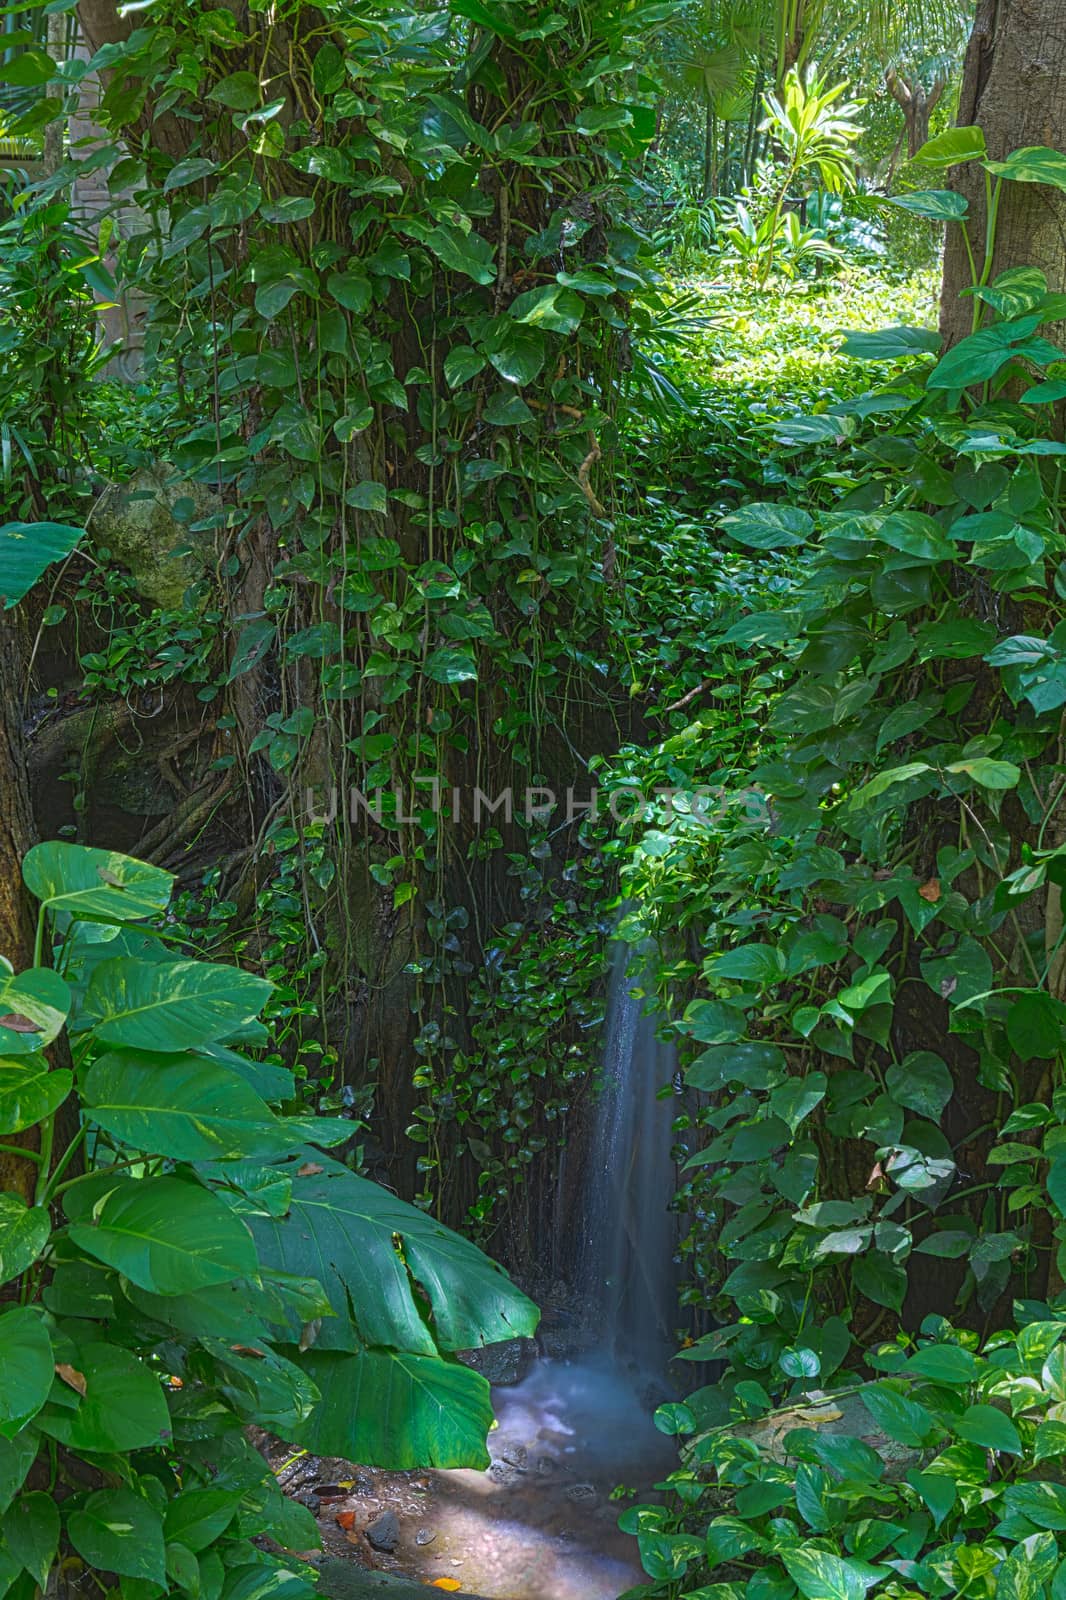 Beautiful natural background image of a tranquil waterfall in a lush green rainforest with dense foliage